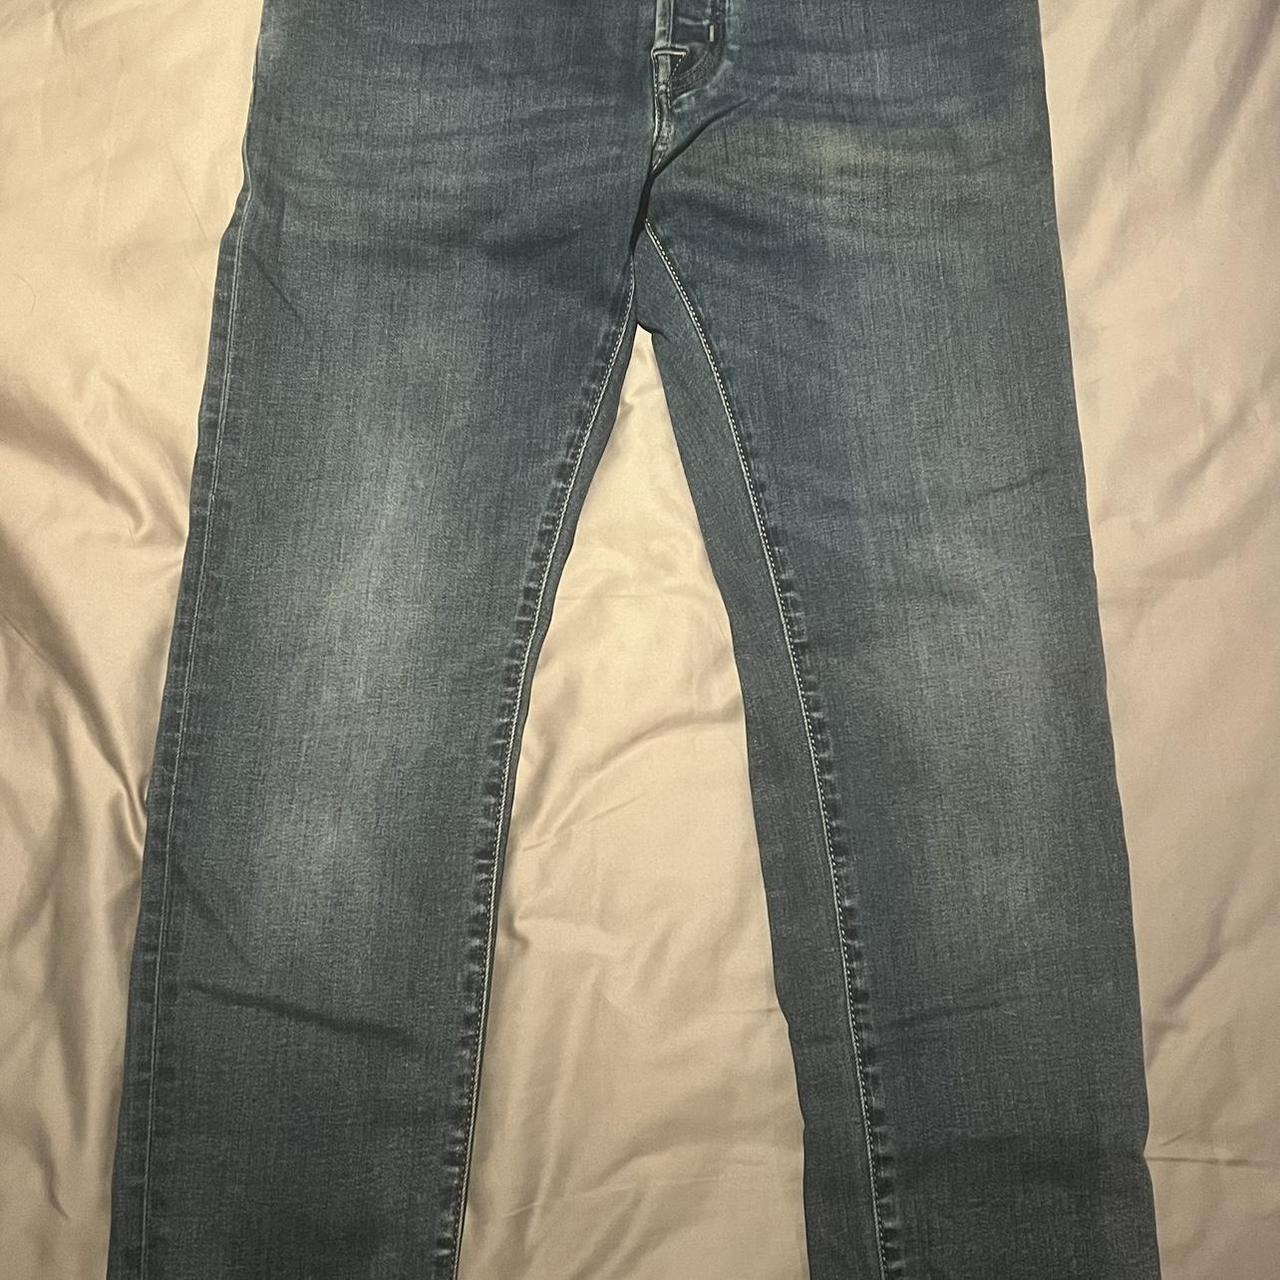 Navy Jacob Cohen jeans size 33 style 622 open to... - Depop